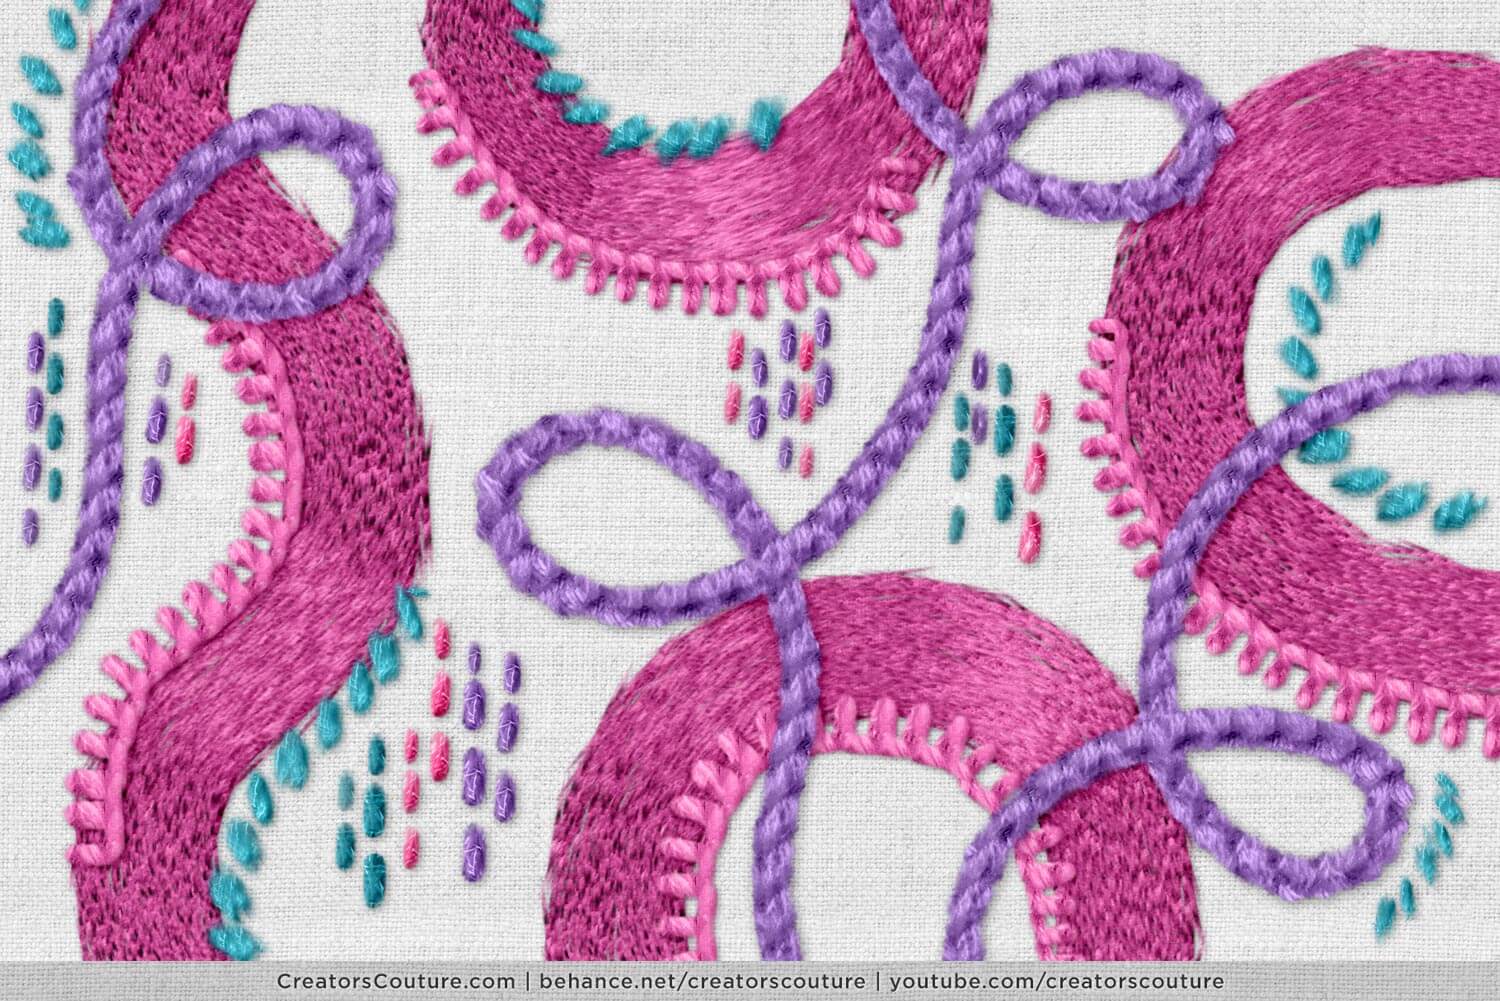 abstract thread illustration in bright colors, created using special embroidery Photoshop brushes